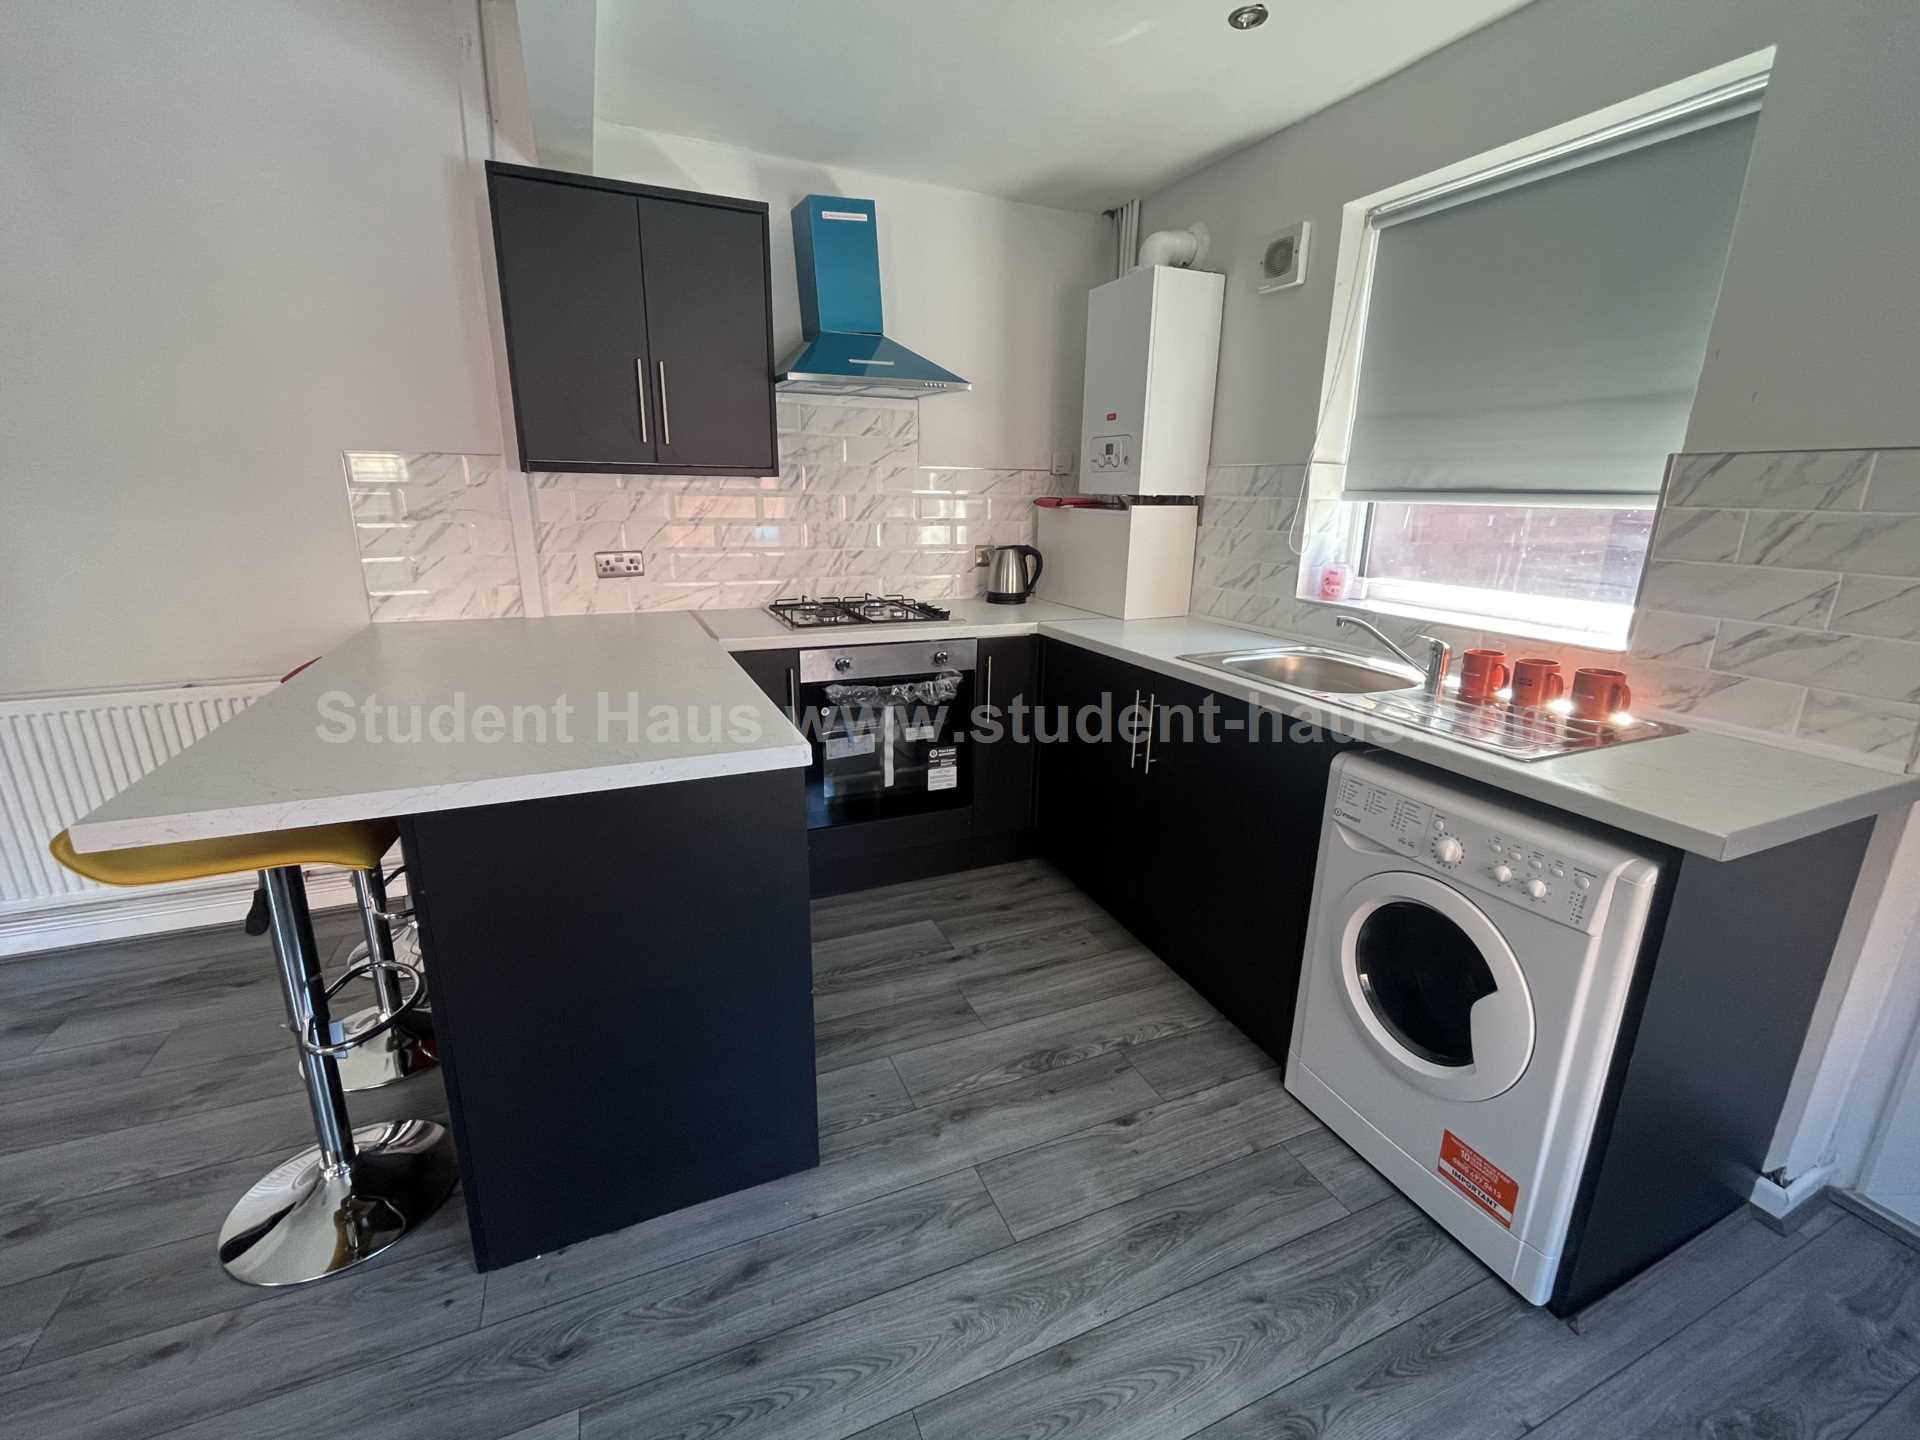 3 bed Room for rent in Liverpool. From Student Haus